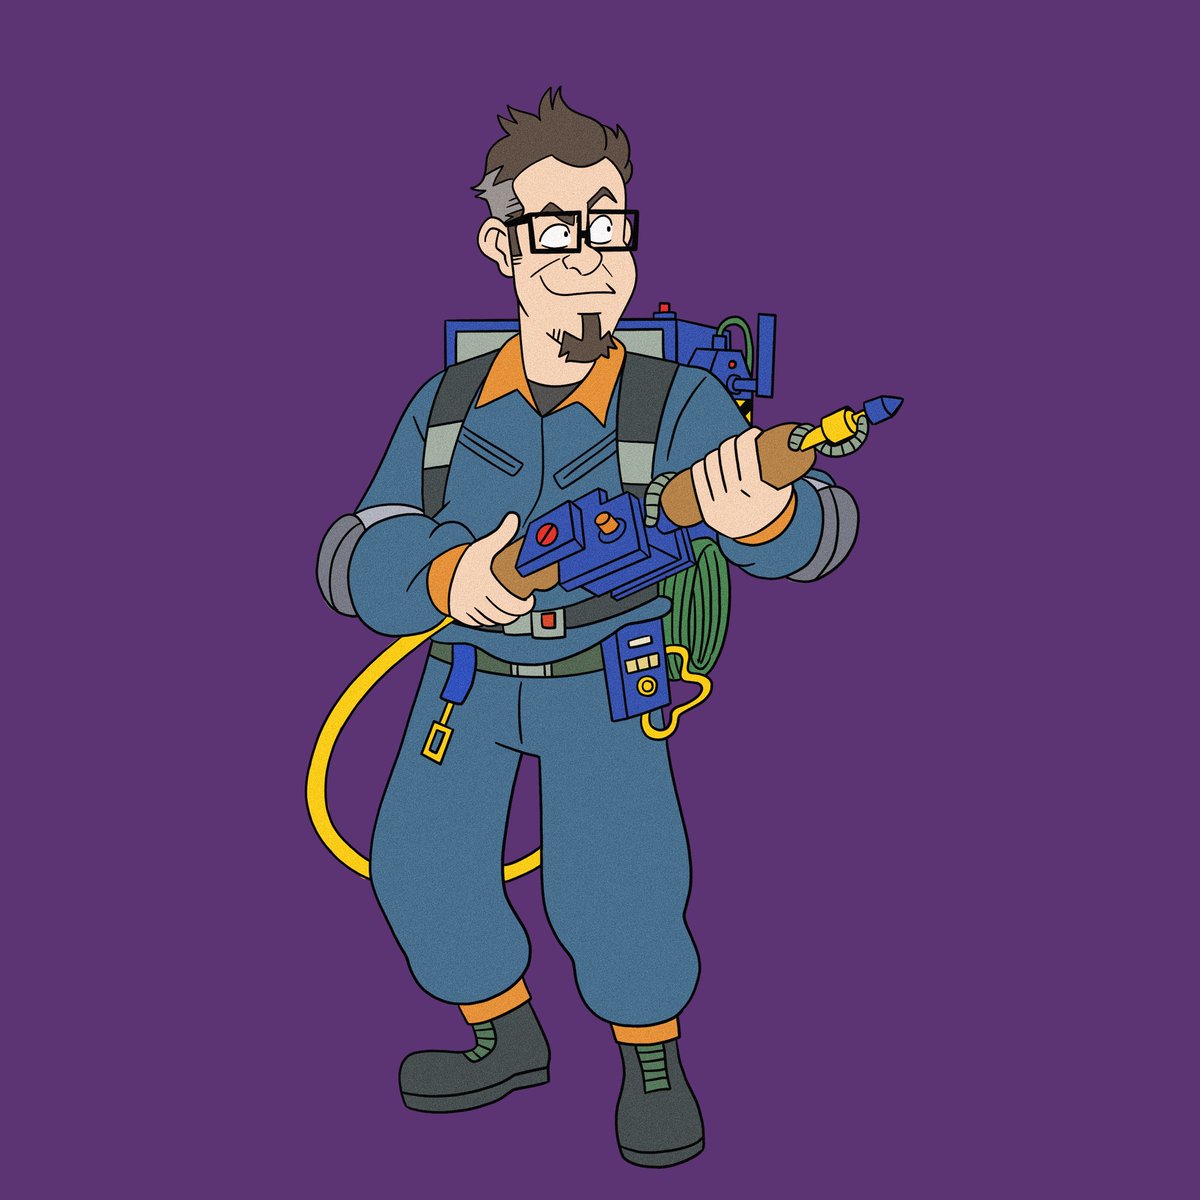 Real Ghostbusters me! #ghostbusters #therealghostbusters